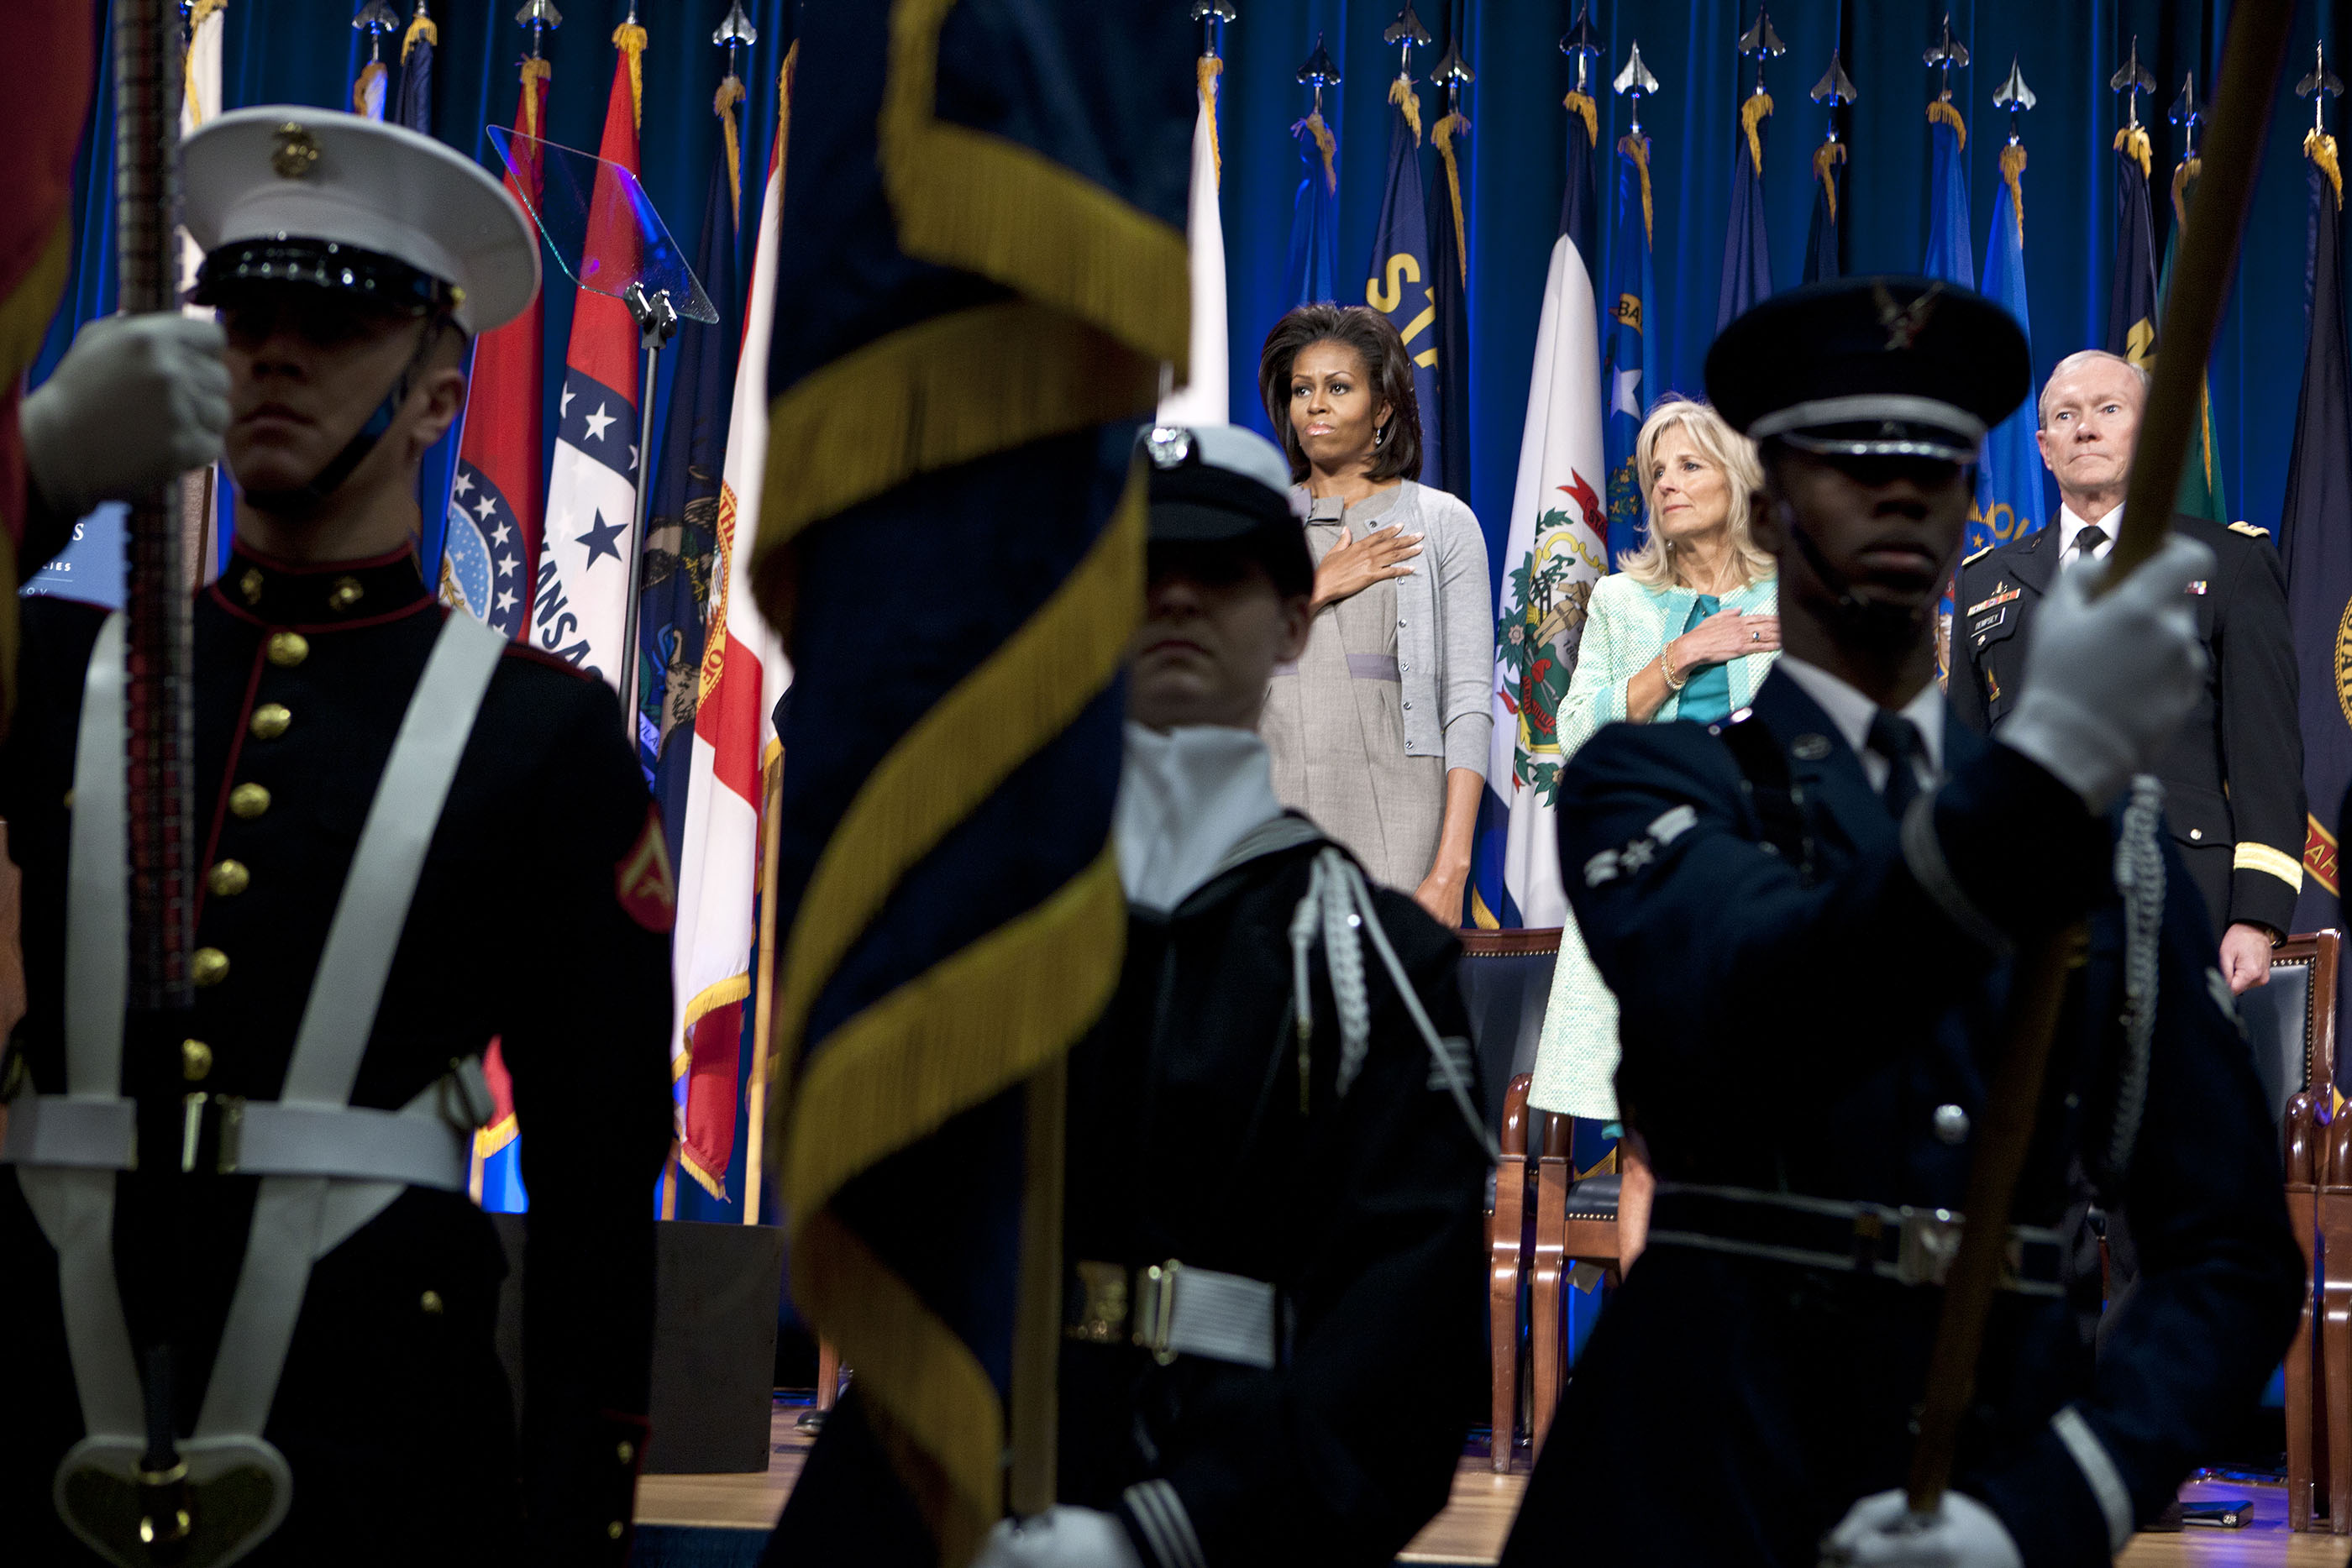 The First Lady and Dr. Biden participate in a military spouse employment event at the Pentagon in Arlington, Va., Feb. 15, 2012. (Official White House Photo by Chuck Kennedy)